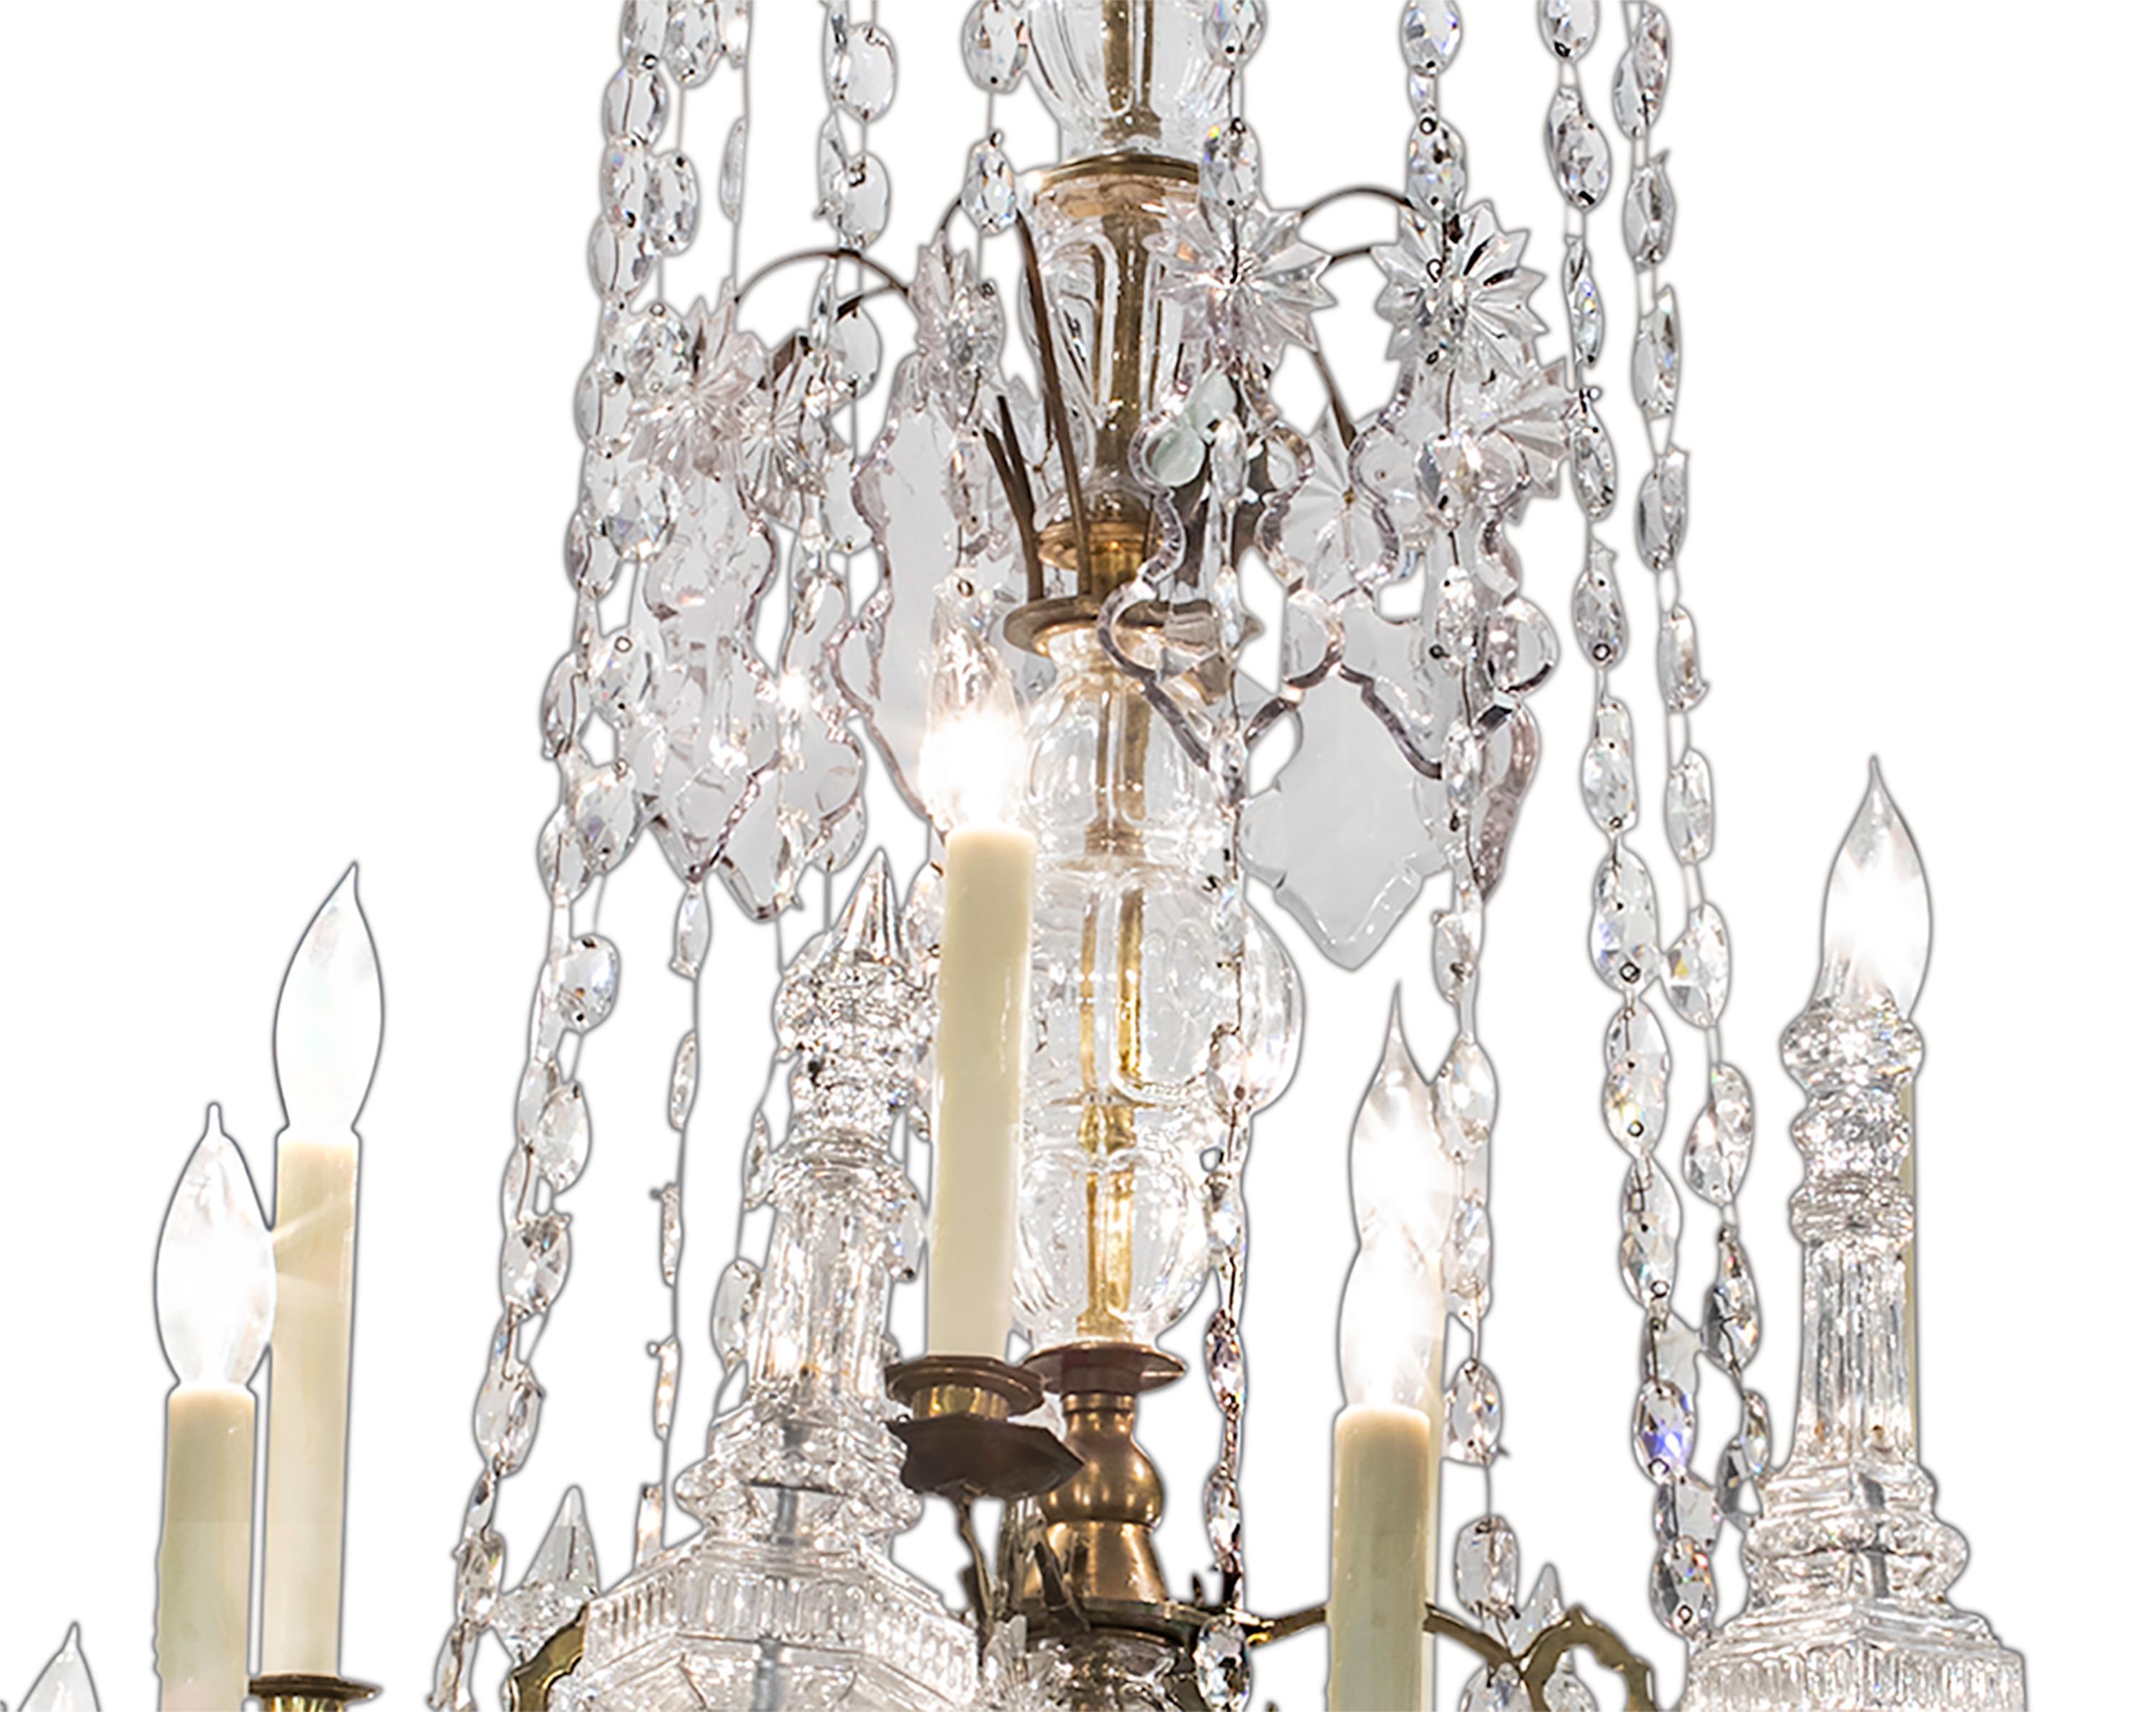 Exceptionally beautiful and elegant early 19th century French Baccarat chandelier. 12 lights with multifaceted crystals, bronze frame chandelier. Gracefully tiered basket shape with eight towering crystal poigards, finishing with large crystal ball